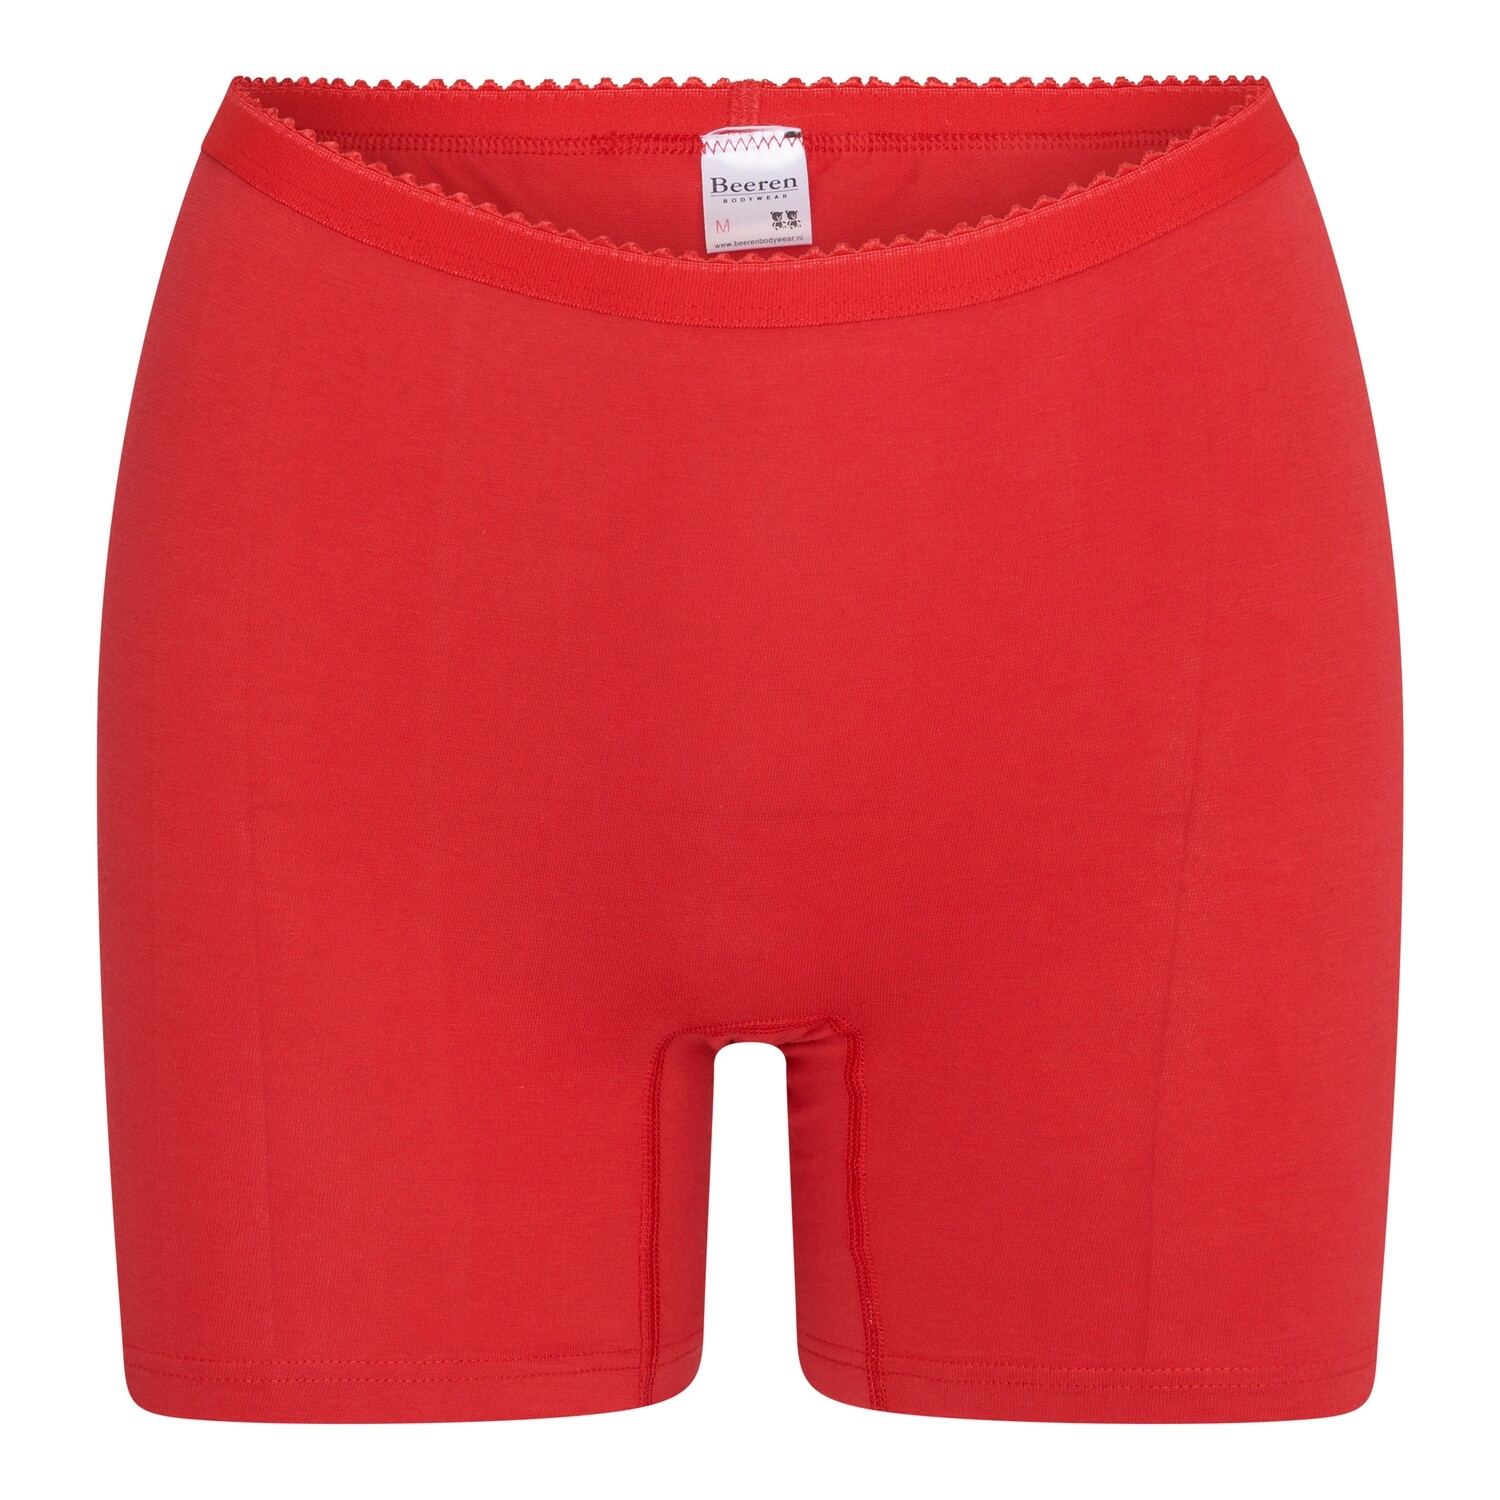 (02-017) Dames boxer Softly rood XXL